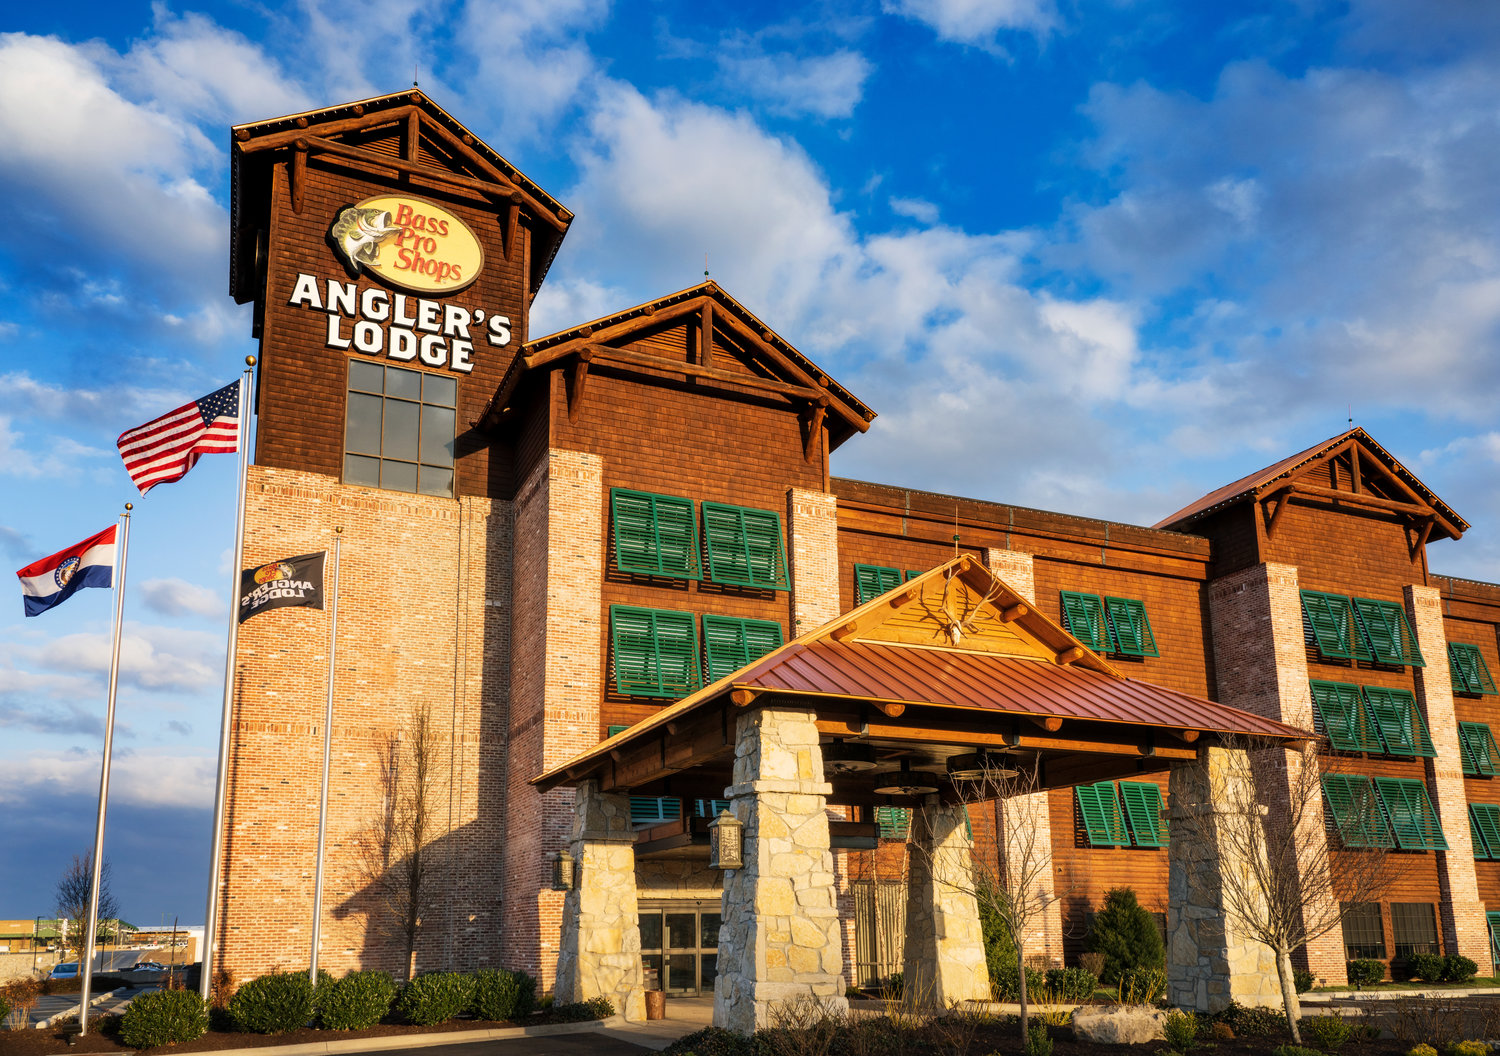 Angler’s Lodge is now open in Hollister.